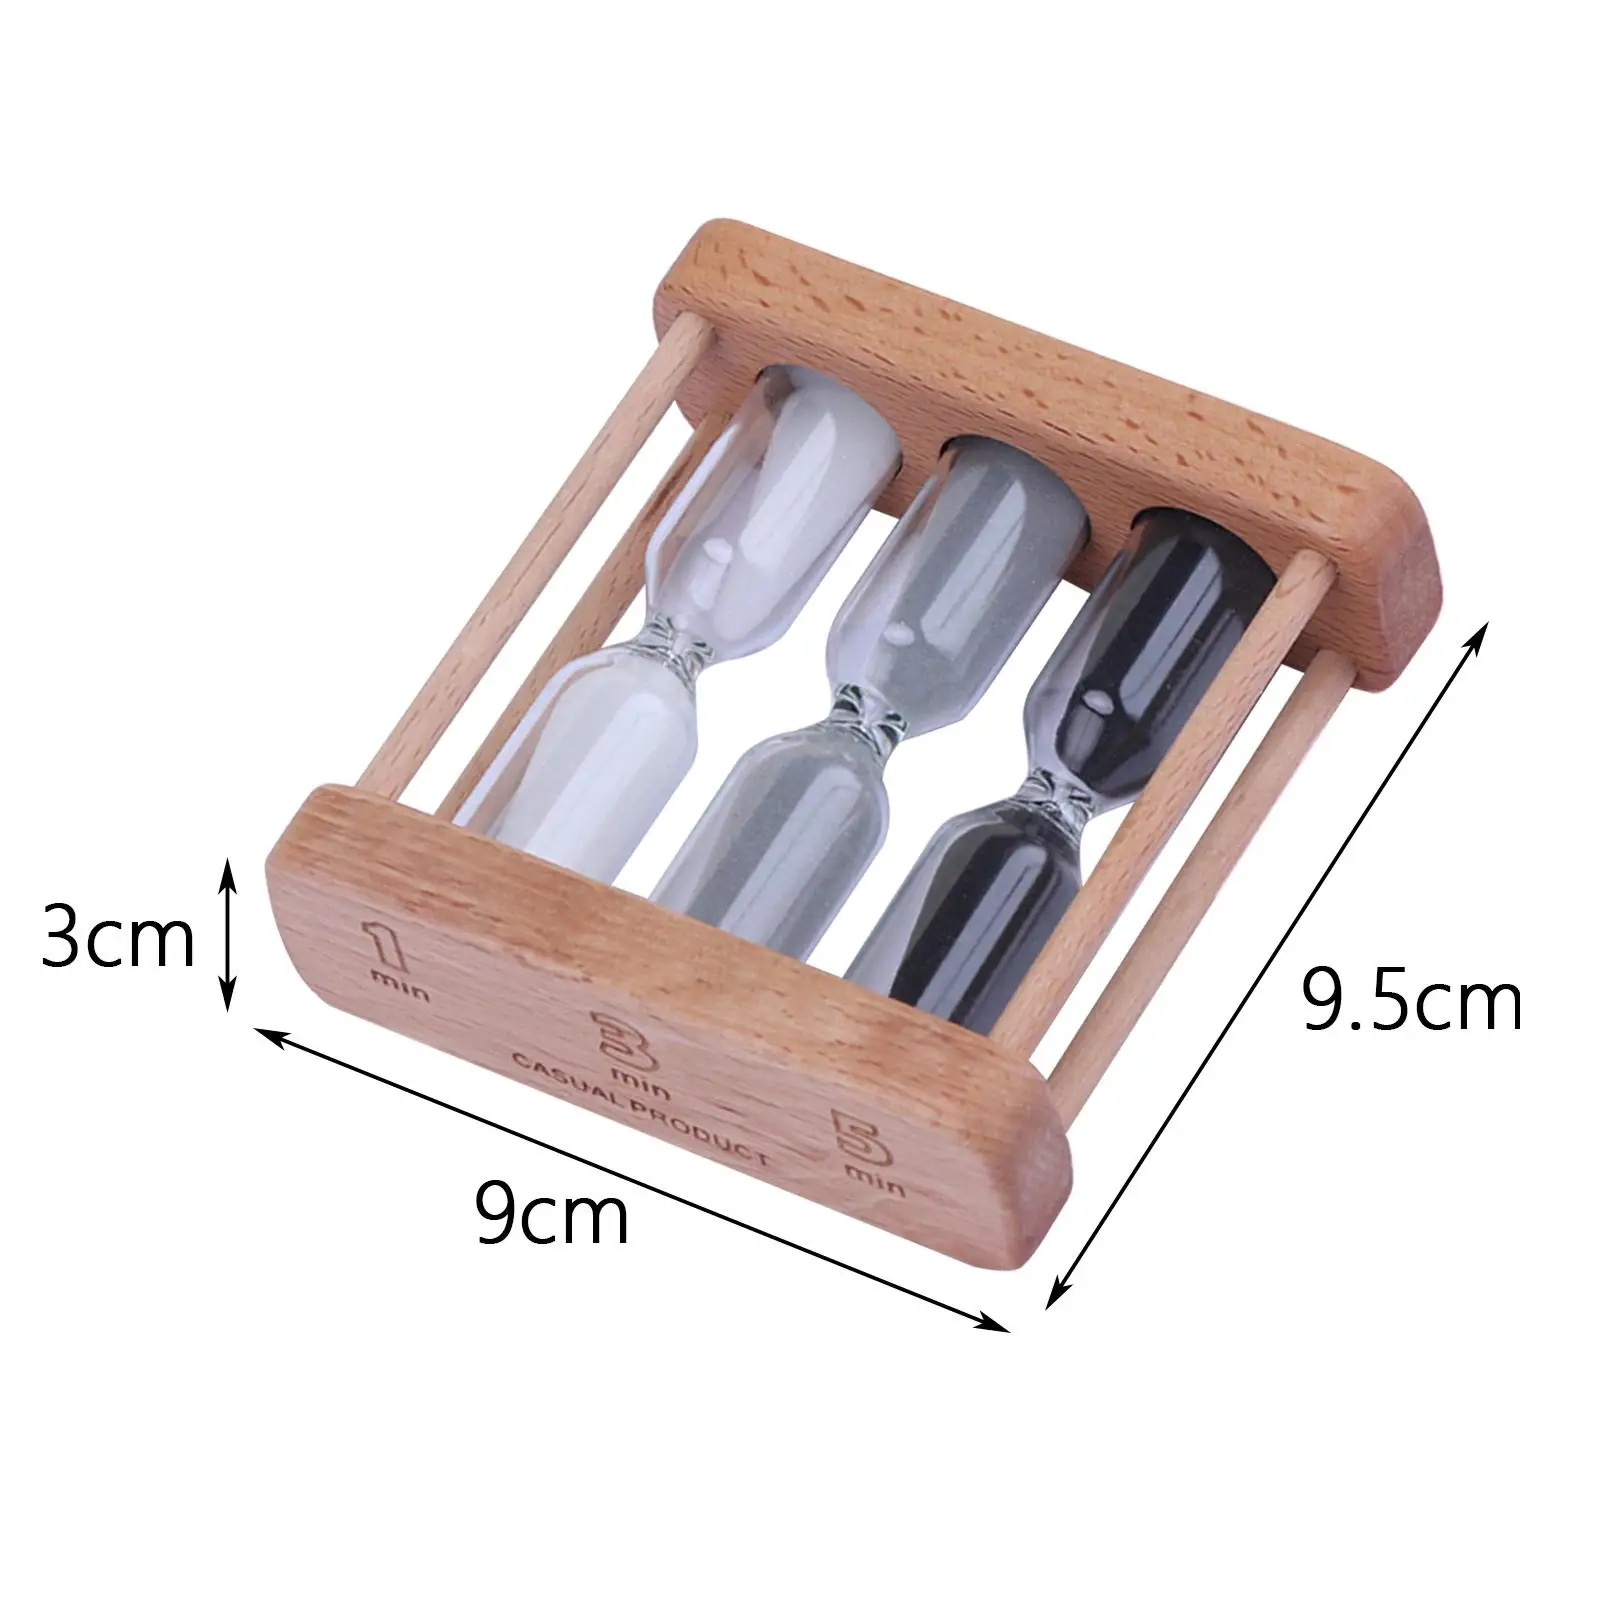 Wooden Sand Hourglass Timer Sandglass Timer Mini Sand Timer Wood Frame Hourglass for Games Kitchen Cooking Office Decor